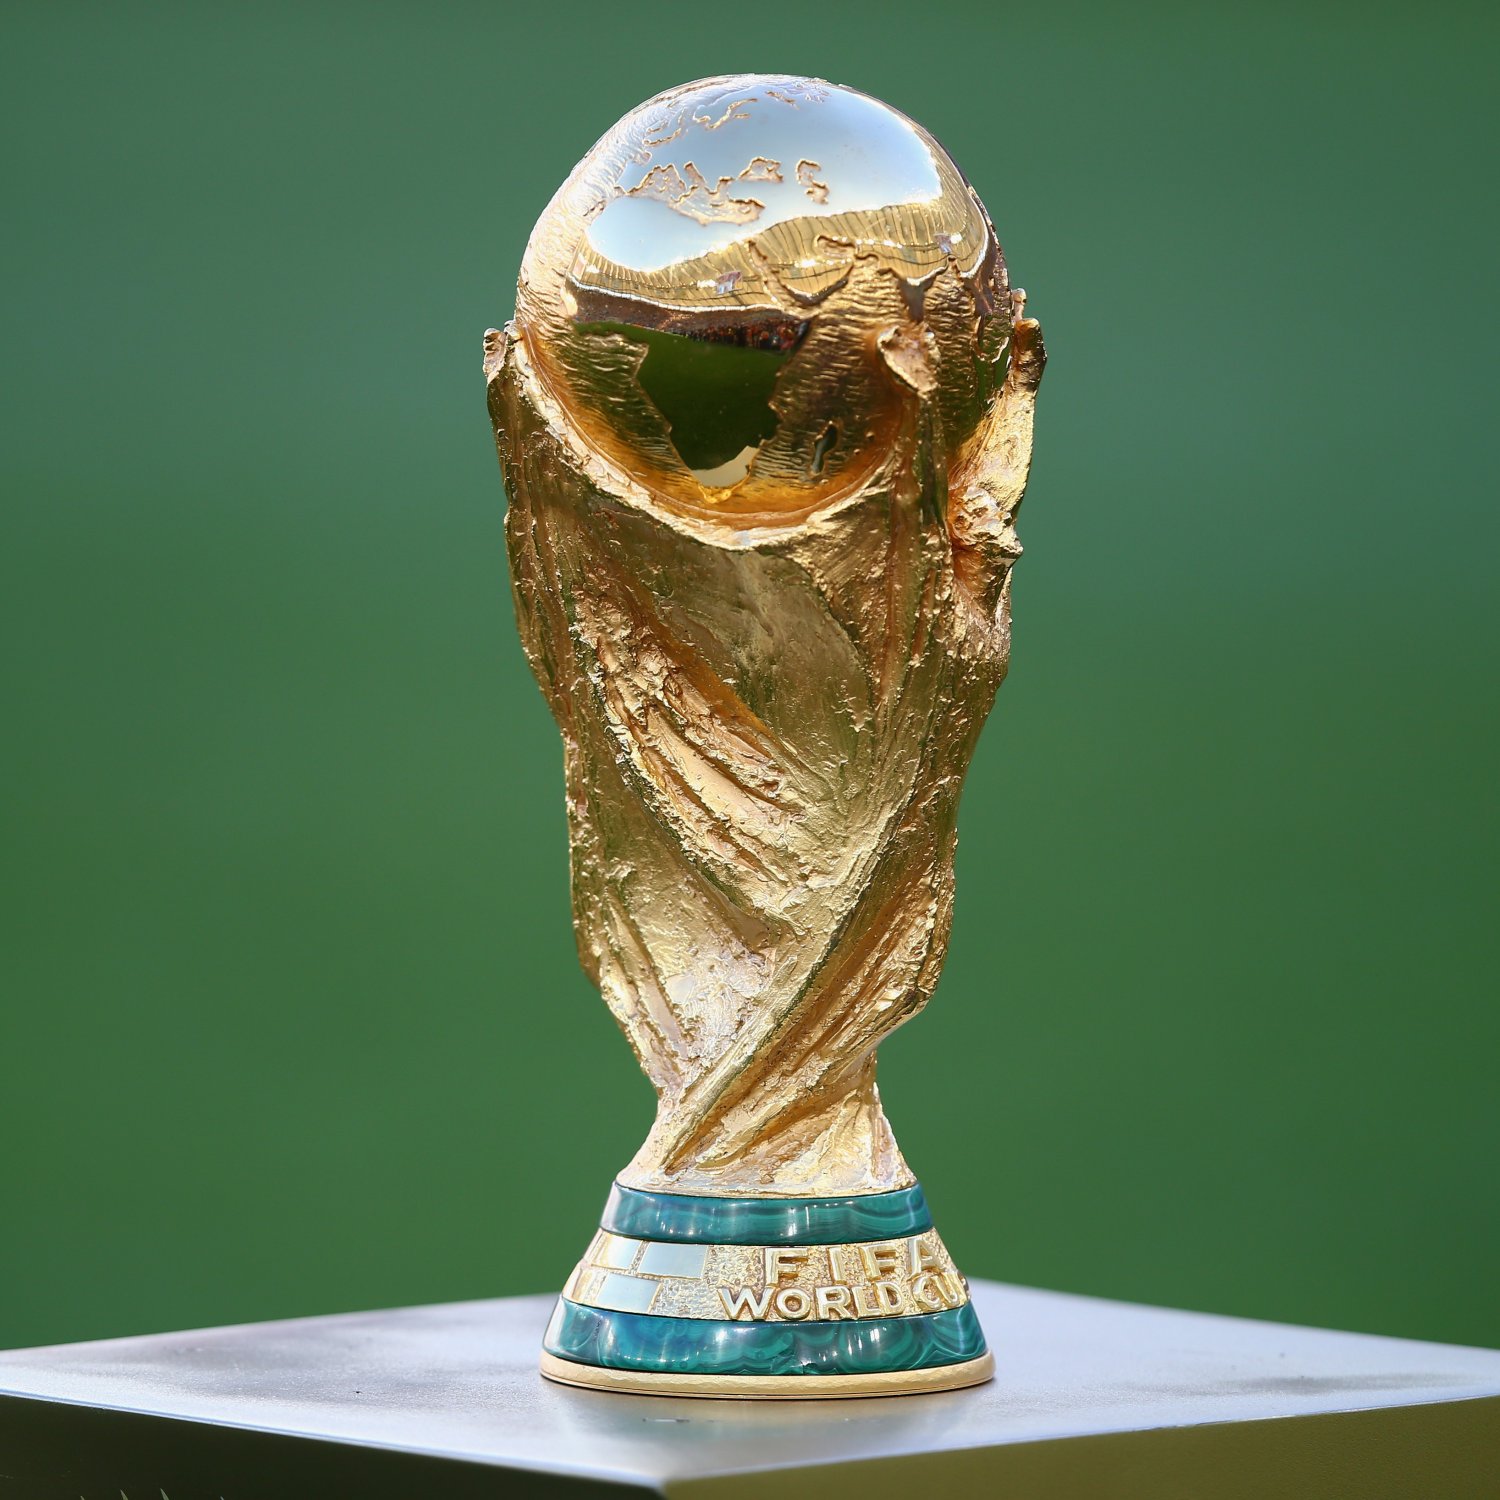 World Cup 2014 Trophy Weight, FIFA Prize History, Gold Carat Details